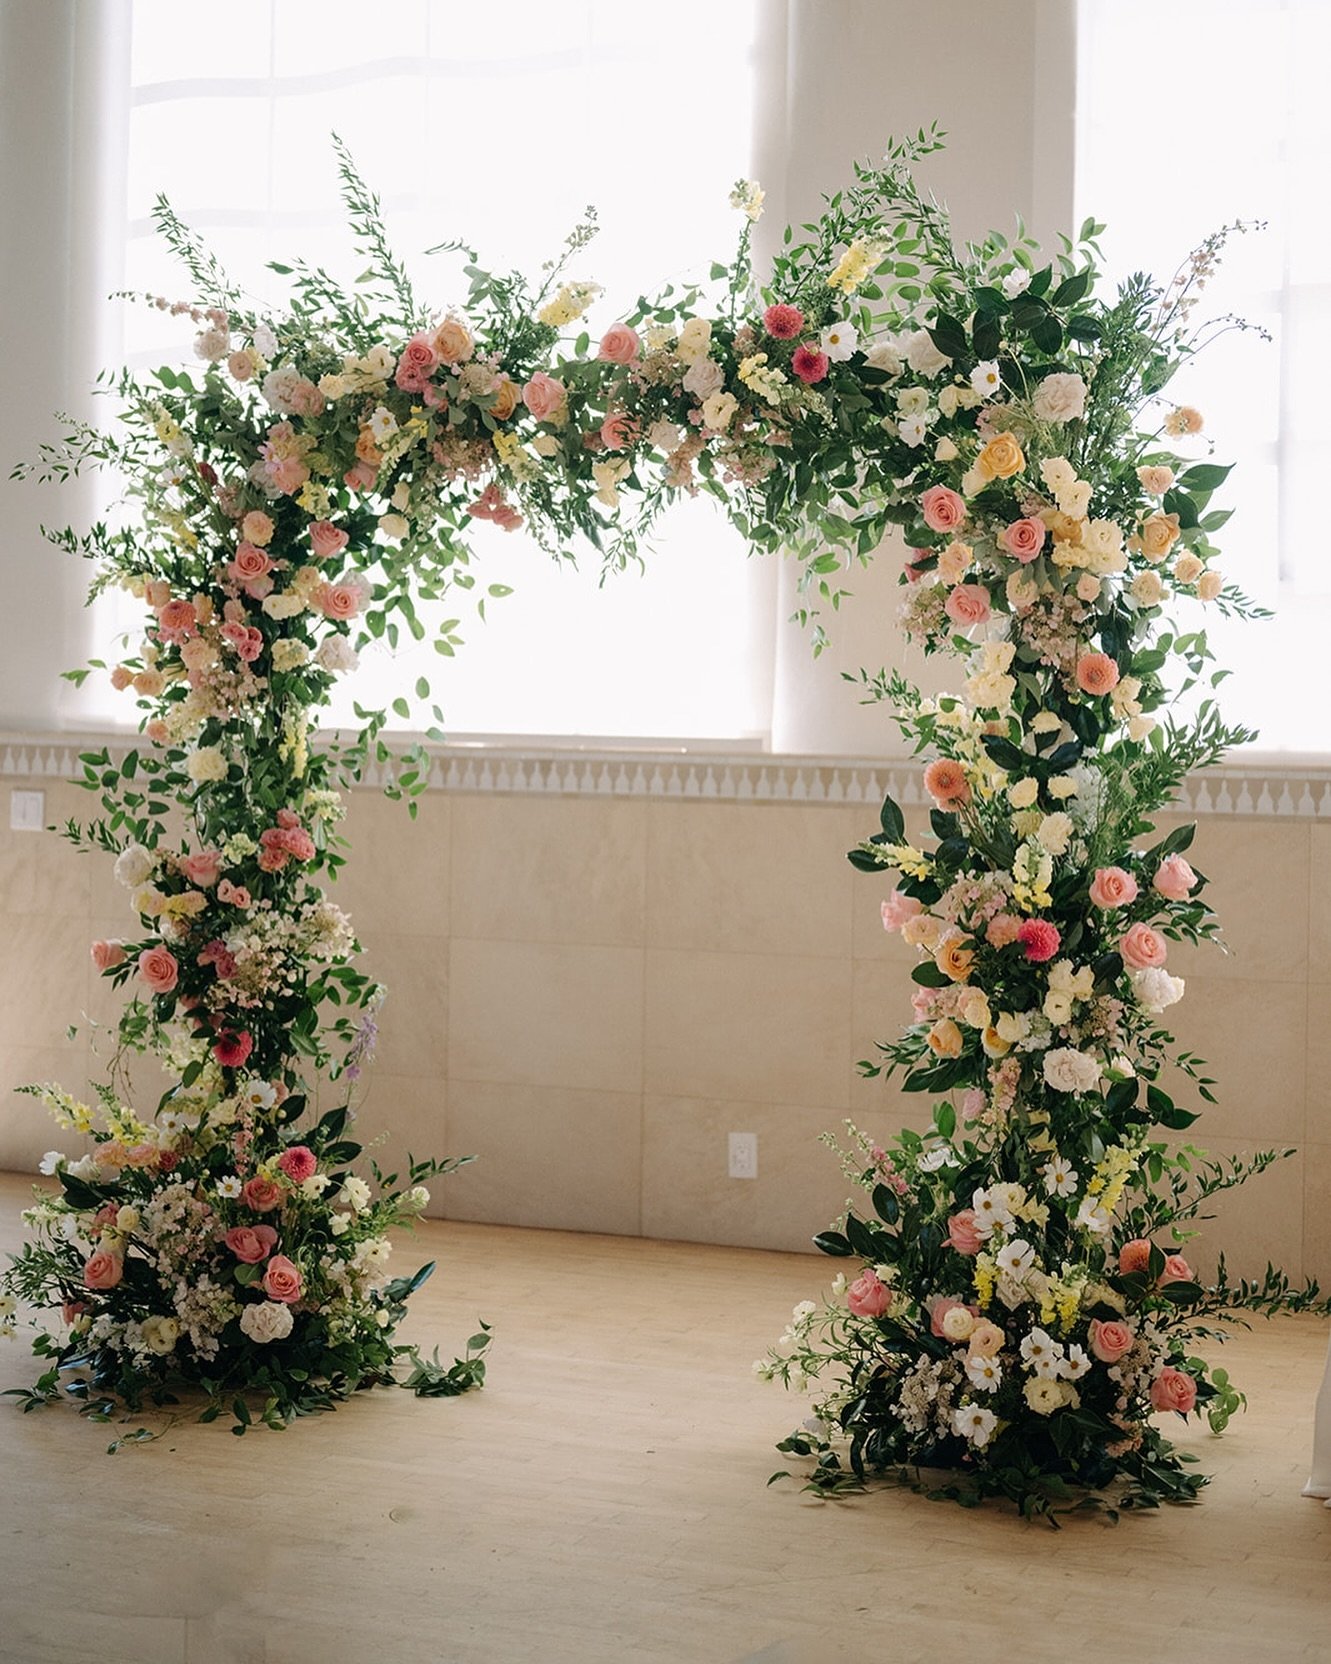 This arch was everything! Loved how use and full we were able to go for this gorgeous wedding day! 

Florals | @beautifulsavageflowers 

Venue | @grandgimeno 

Coordinator | @klinkevents 

Photographer | @sarasolphoto 

#oldtownorangewedding #grandgi